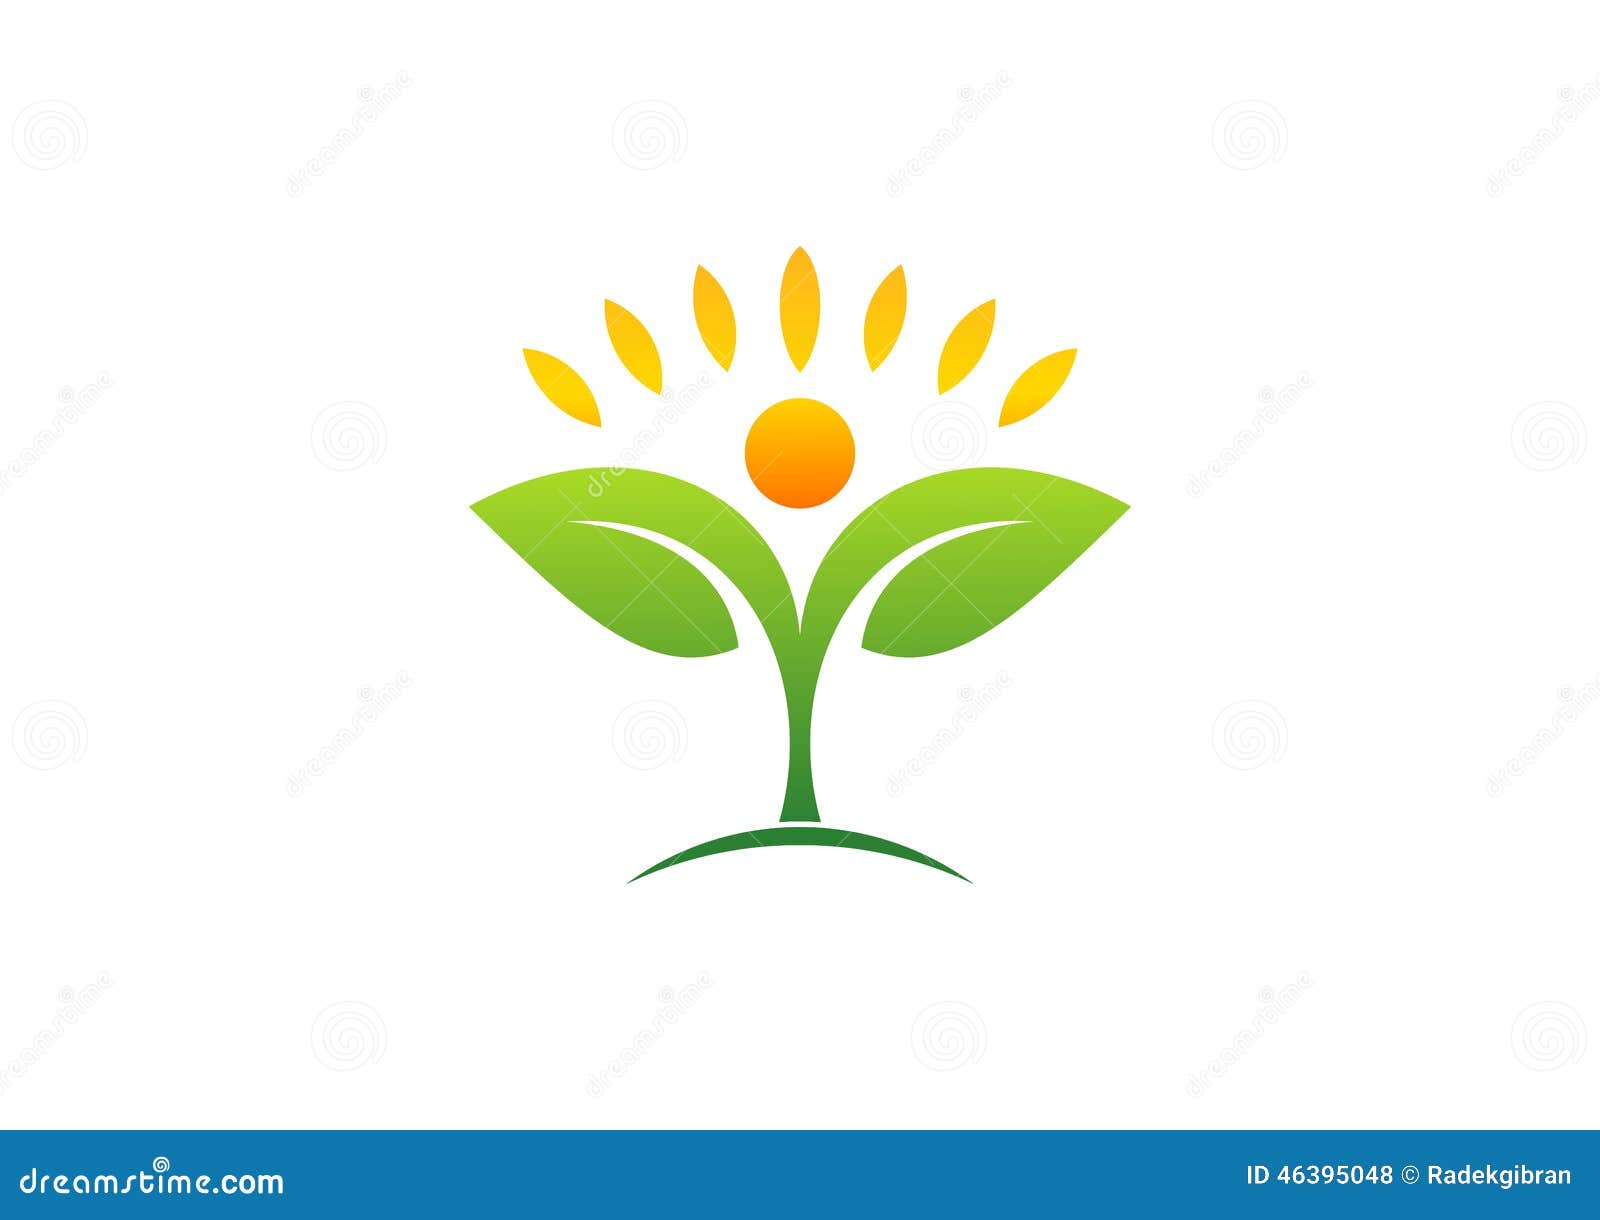 plant, people, natural, logo, health, sun, leaf, botany, ecology,  and icon